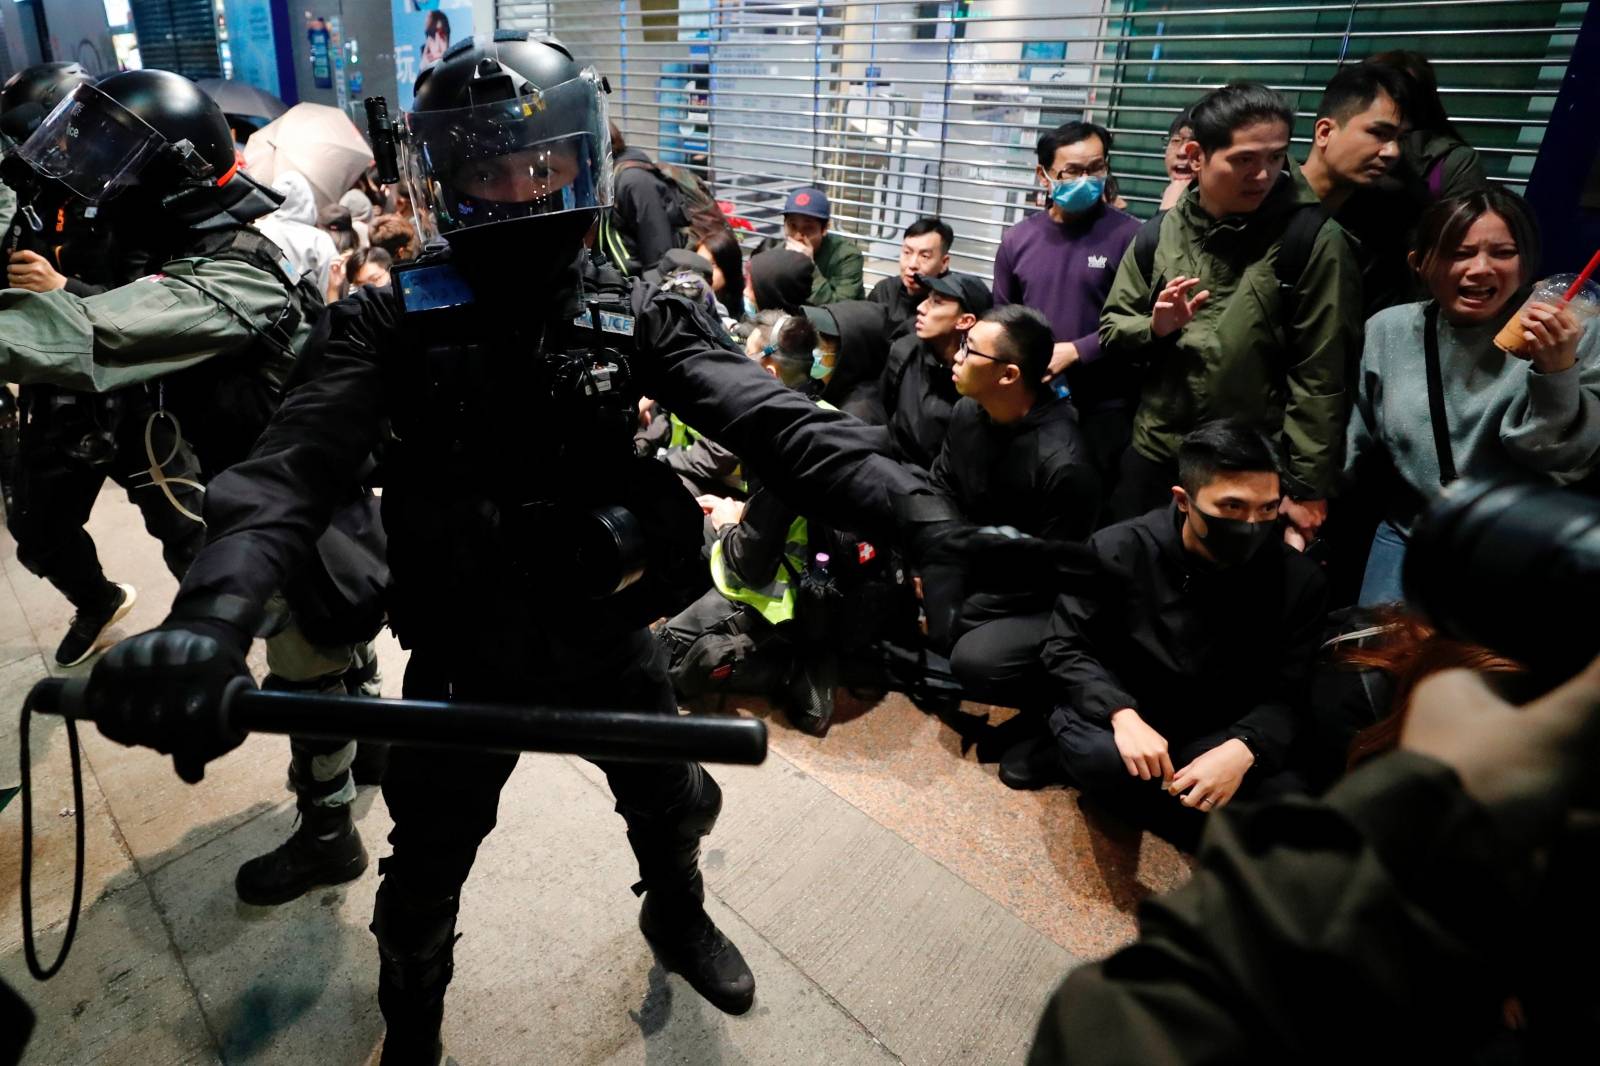 Riot police detain anti-government protesters in a large scale during a legal demonstration on the New Year's Day to call for better governance and democratic reforms in Hong Kong